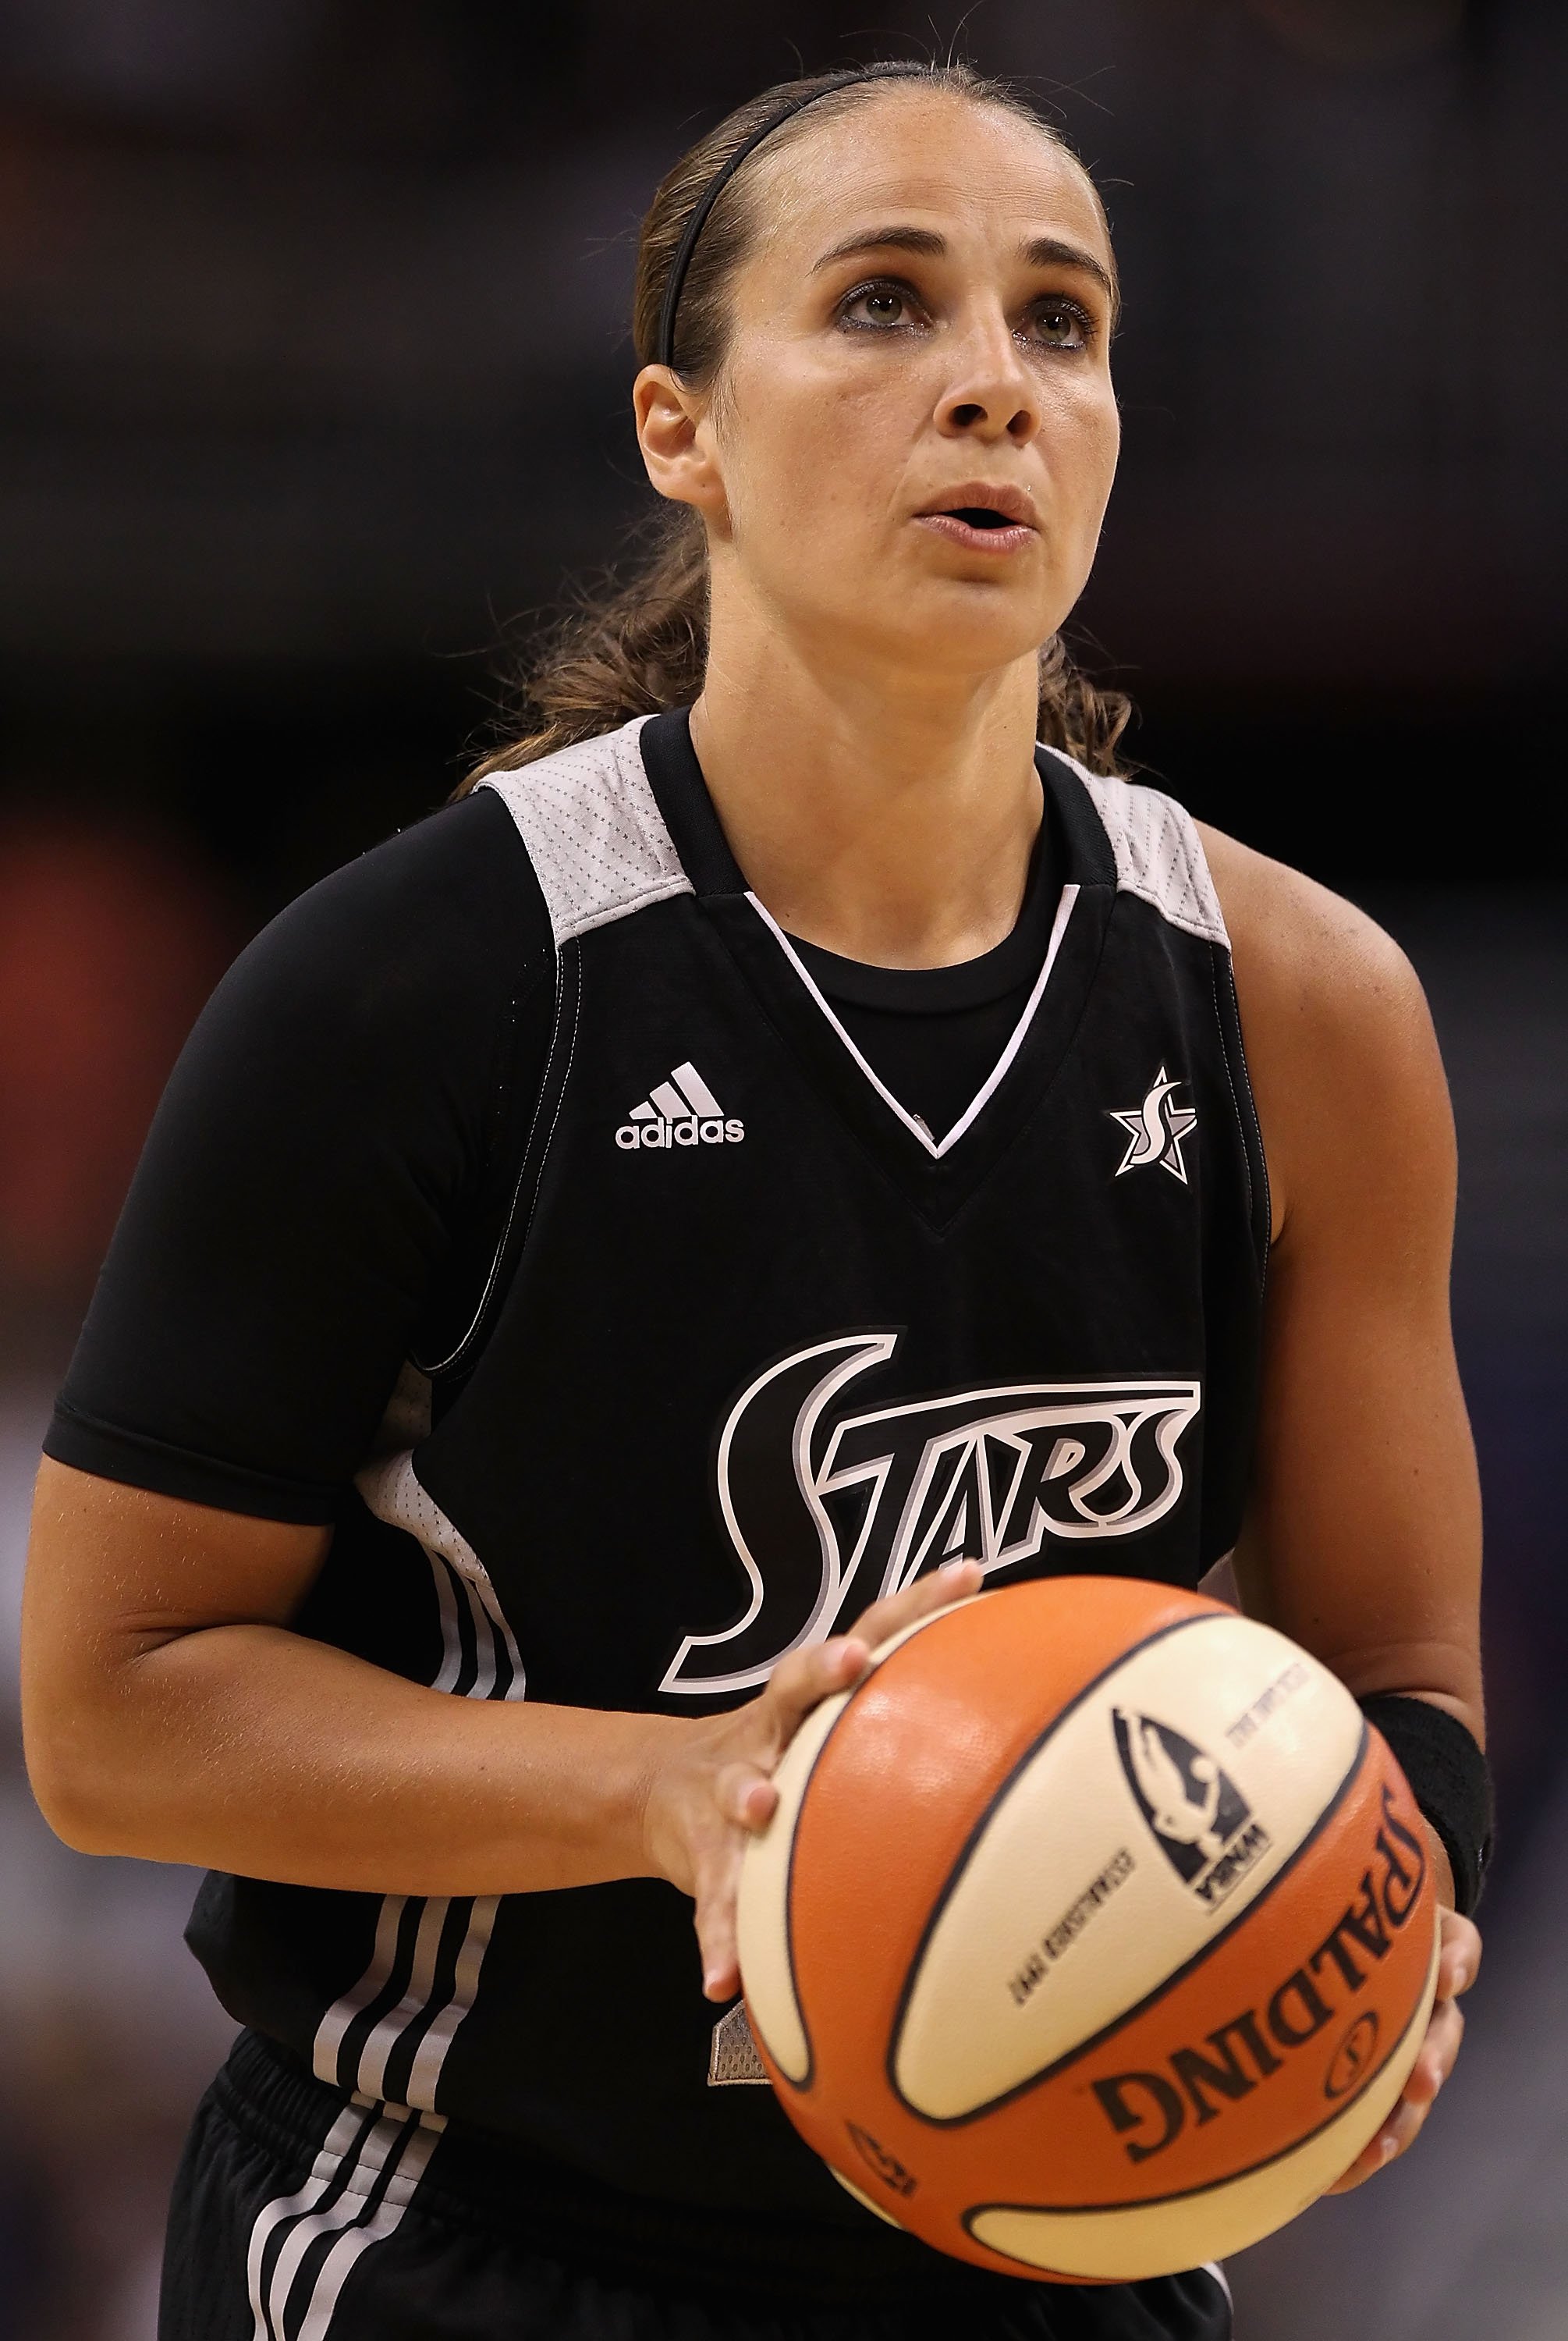 Becky Hammon #25 of the San Antonio Silver Stars shoots a free throw shot during the WNBA game against the Phoenix Mercury at US Airways Center on August 20, 2011 in Phoenix, Arizona. The Mercury defeated the Silver Stars 87-81. NOTE TO USER: User expressly acknowledges and agrees that, by downloading and or using this photograph, User is consenting to the terms and conditions of the Getty Images License Agreement. (Photo by Christian Petersen/Getty Images)